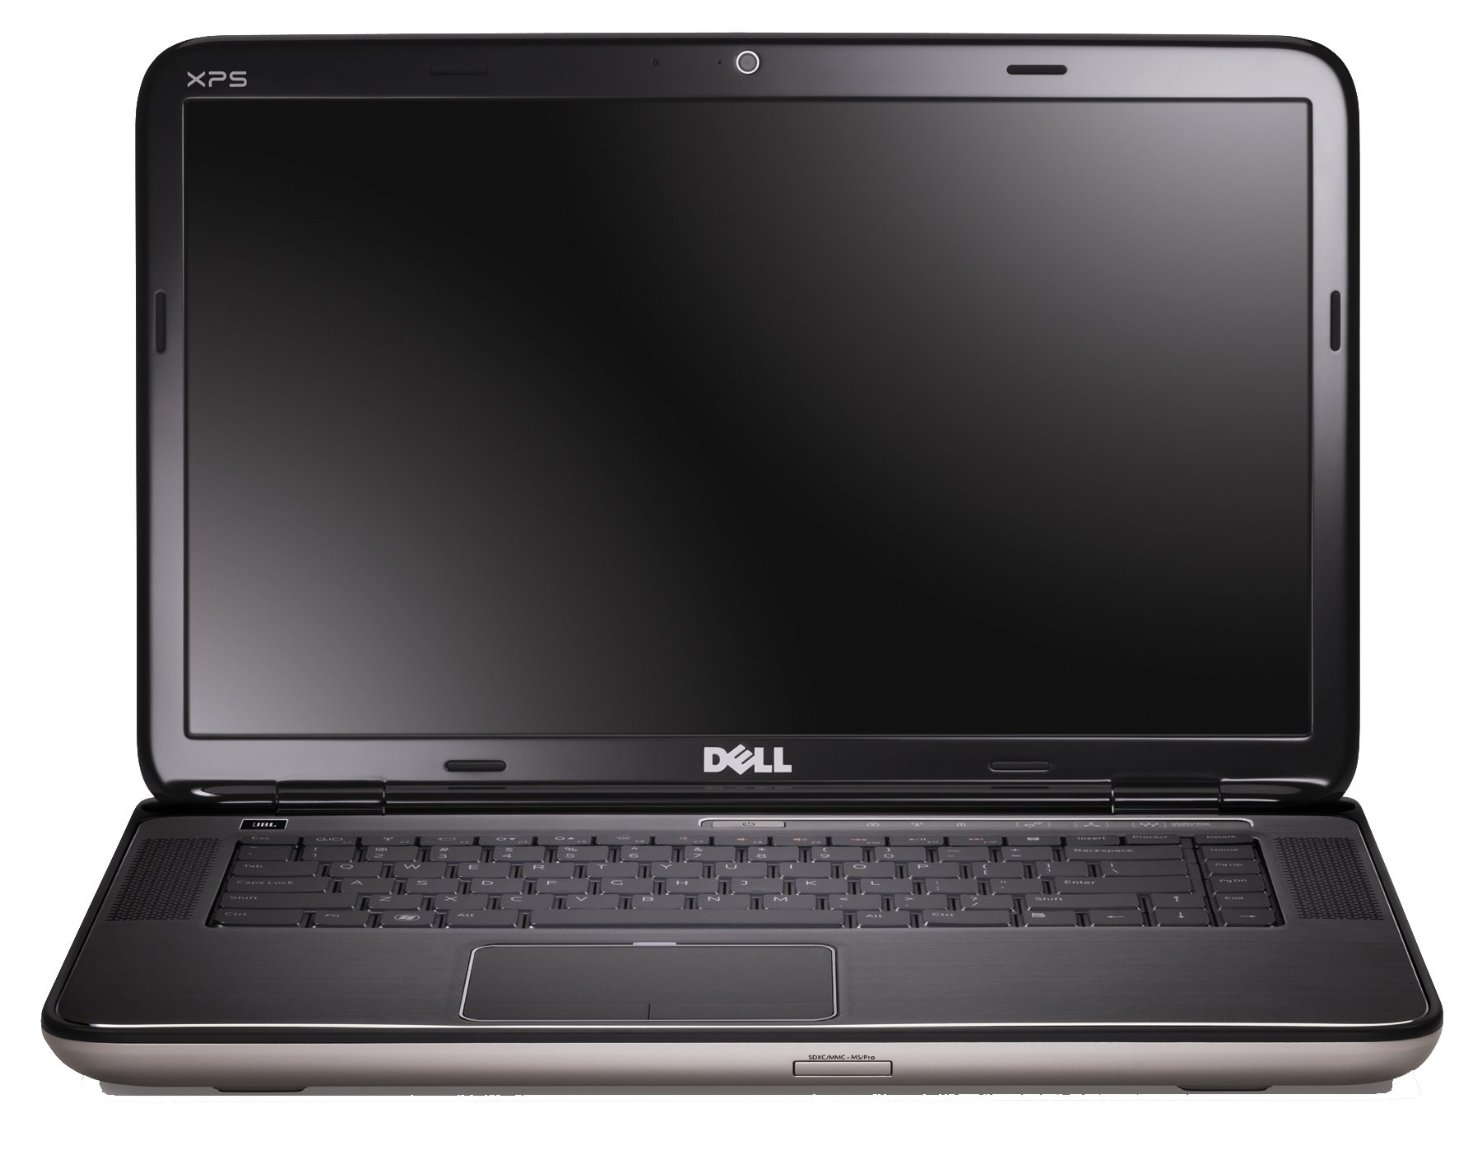  Dell XPS 15 7590-6664  #1